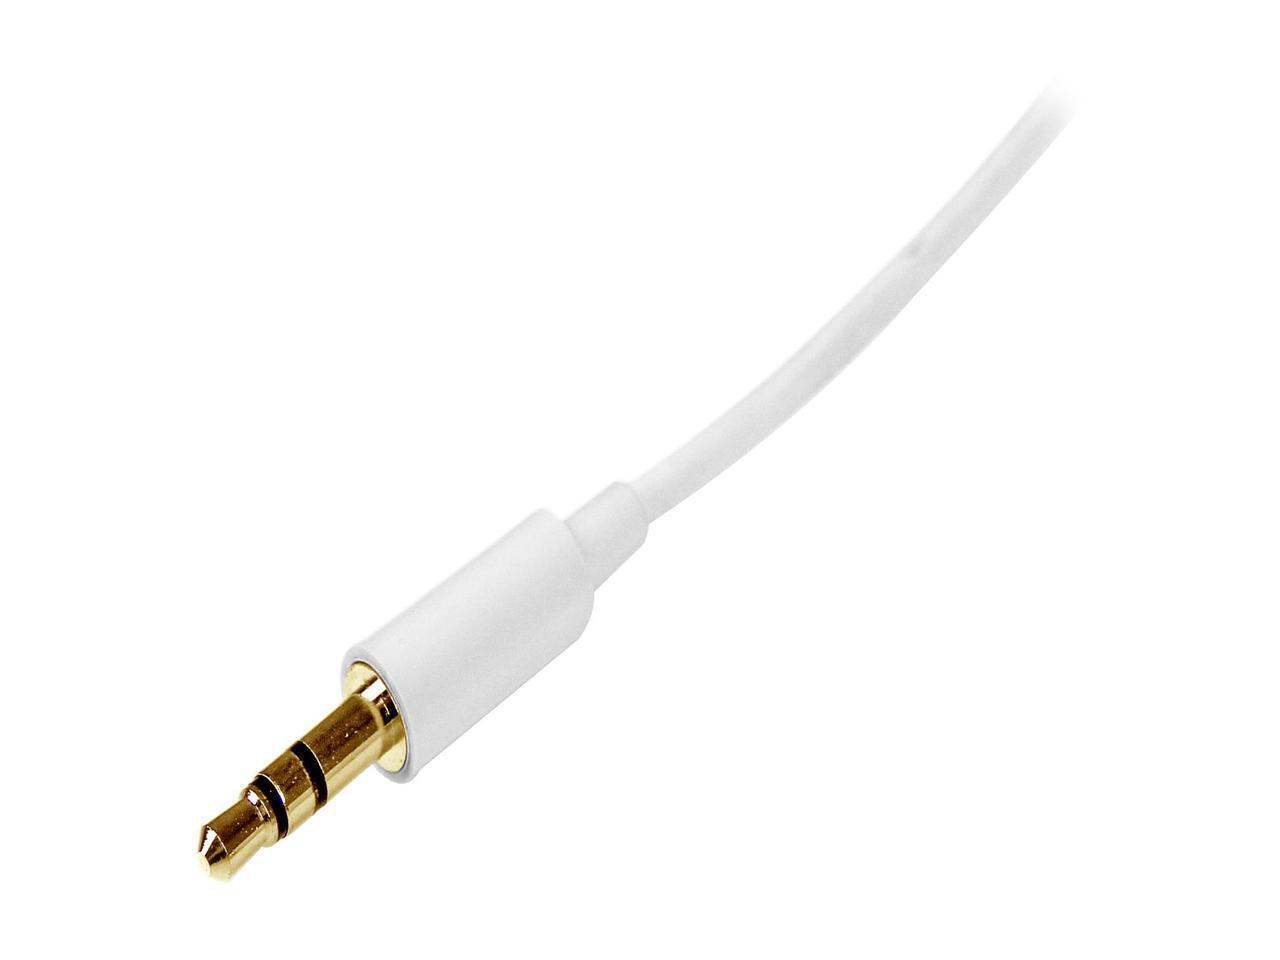 StarTech.com MU3MMMSWH 9.8 ft [3 m] Slim 3.5mm Stereo Audio Cable - Male to Male